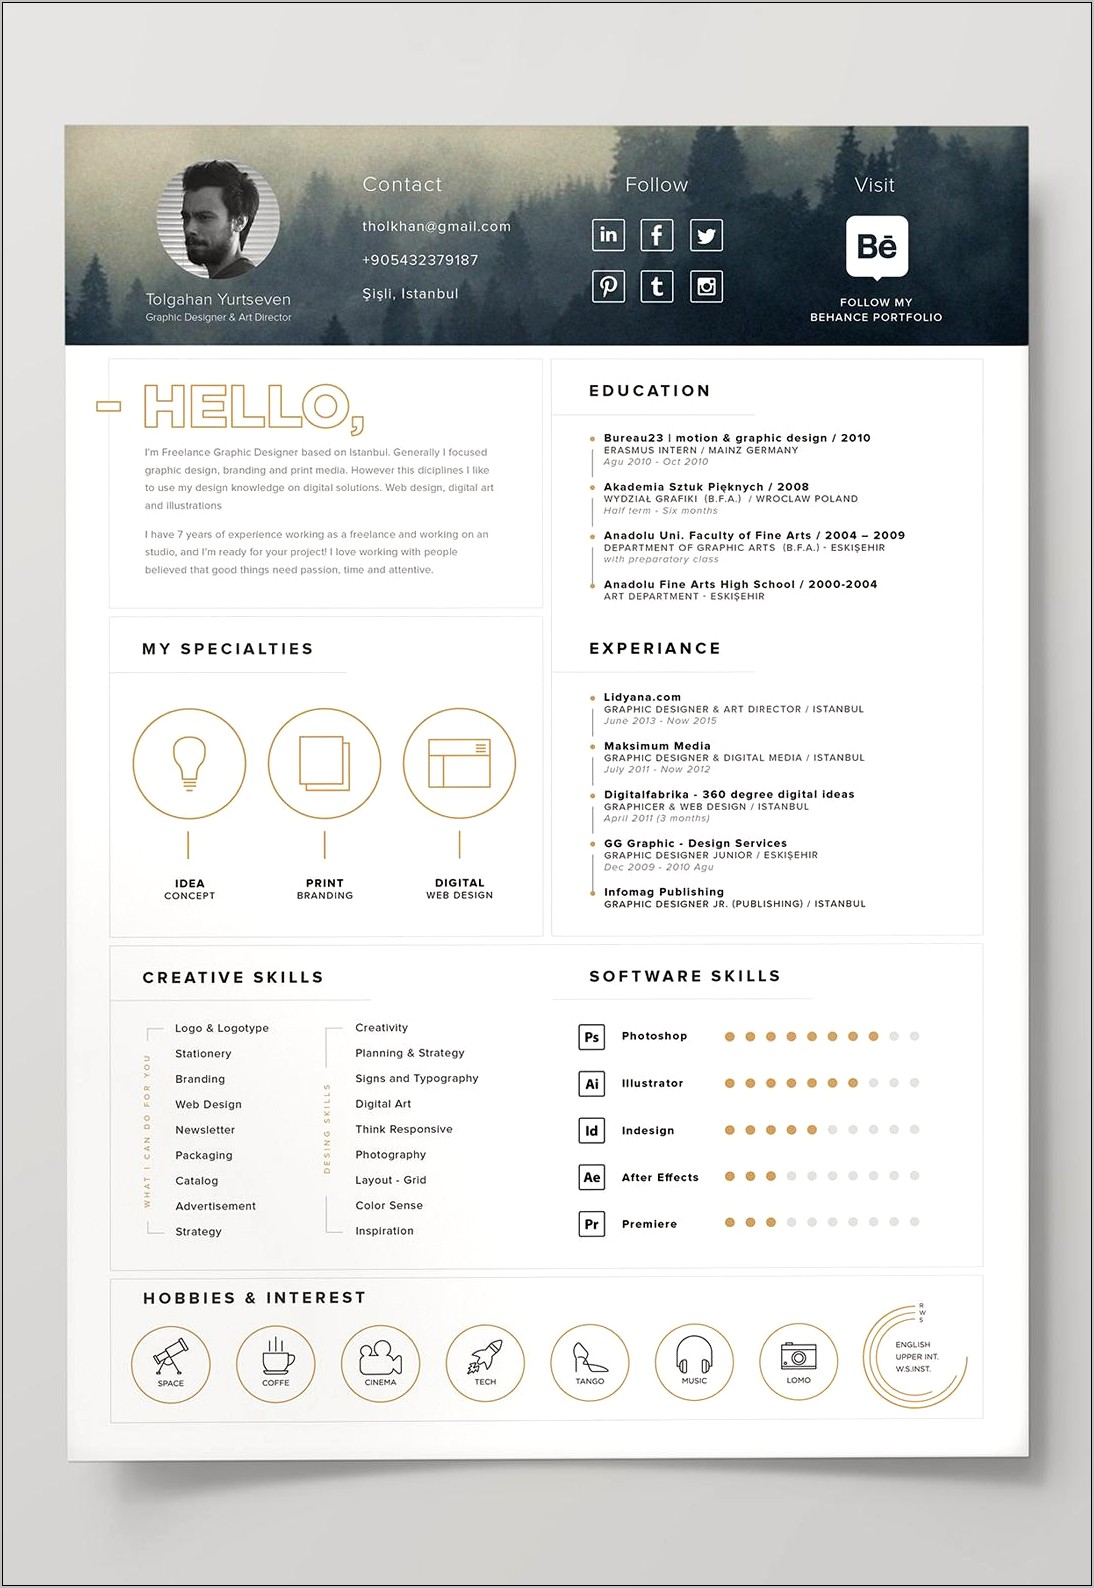 Minimalist Portfolio & Resume After Effects Template Free Download